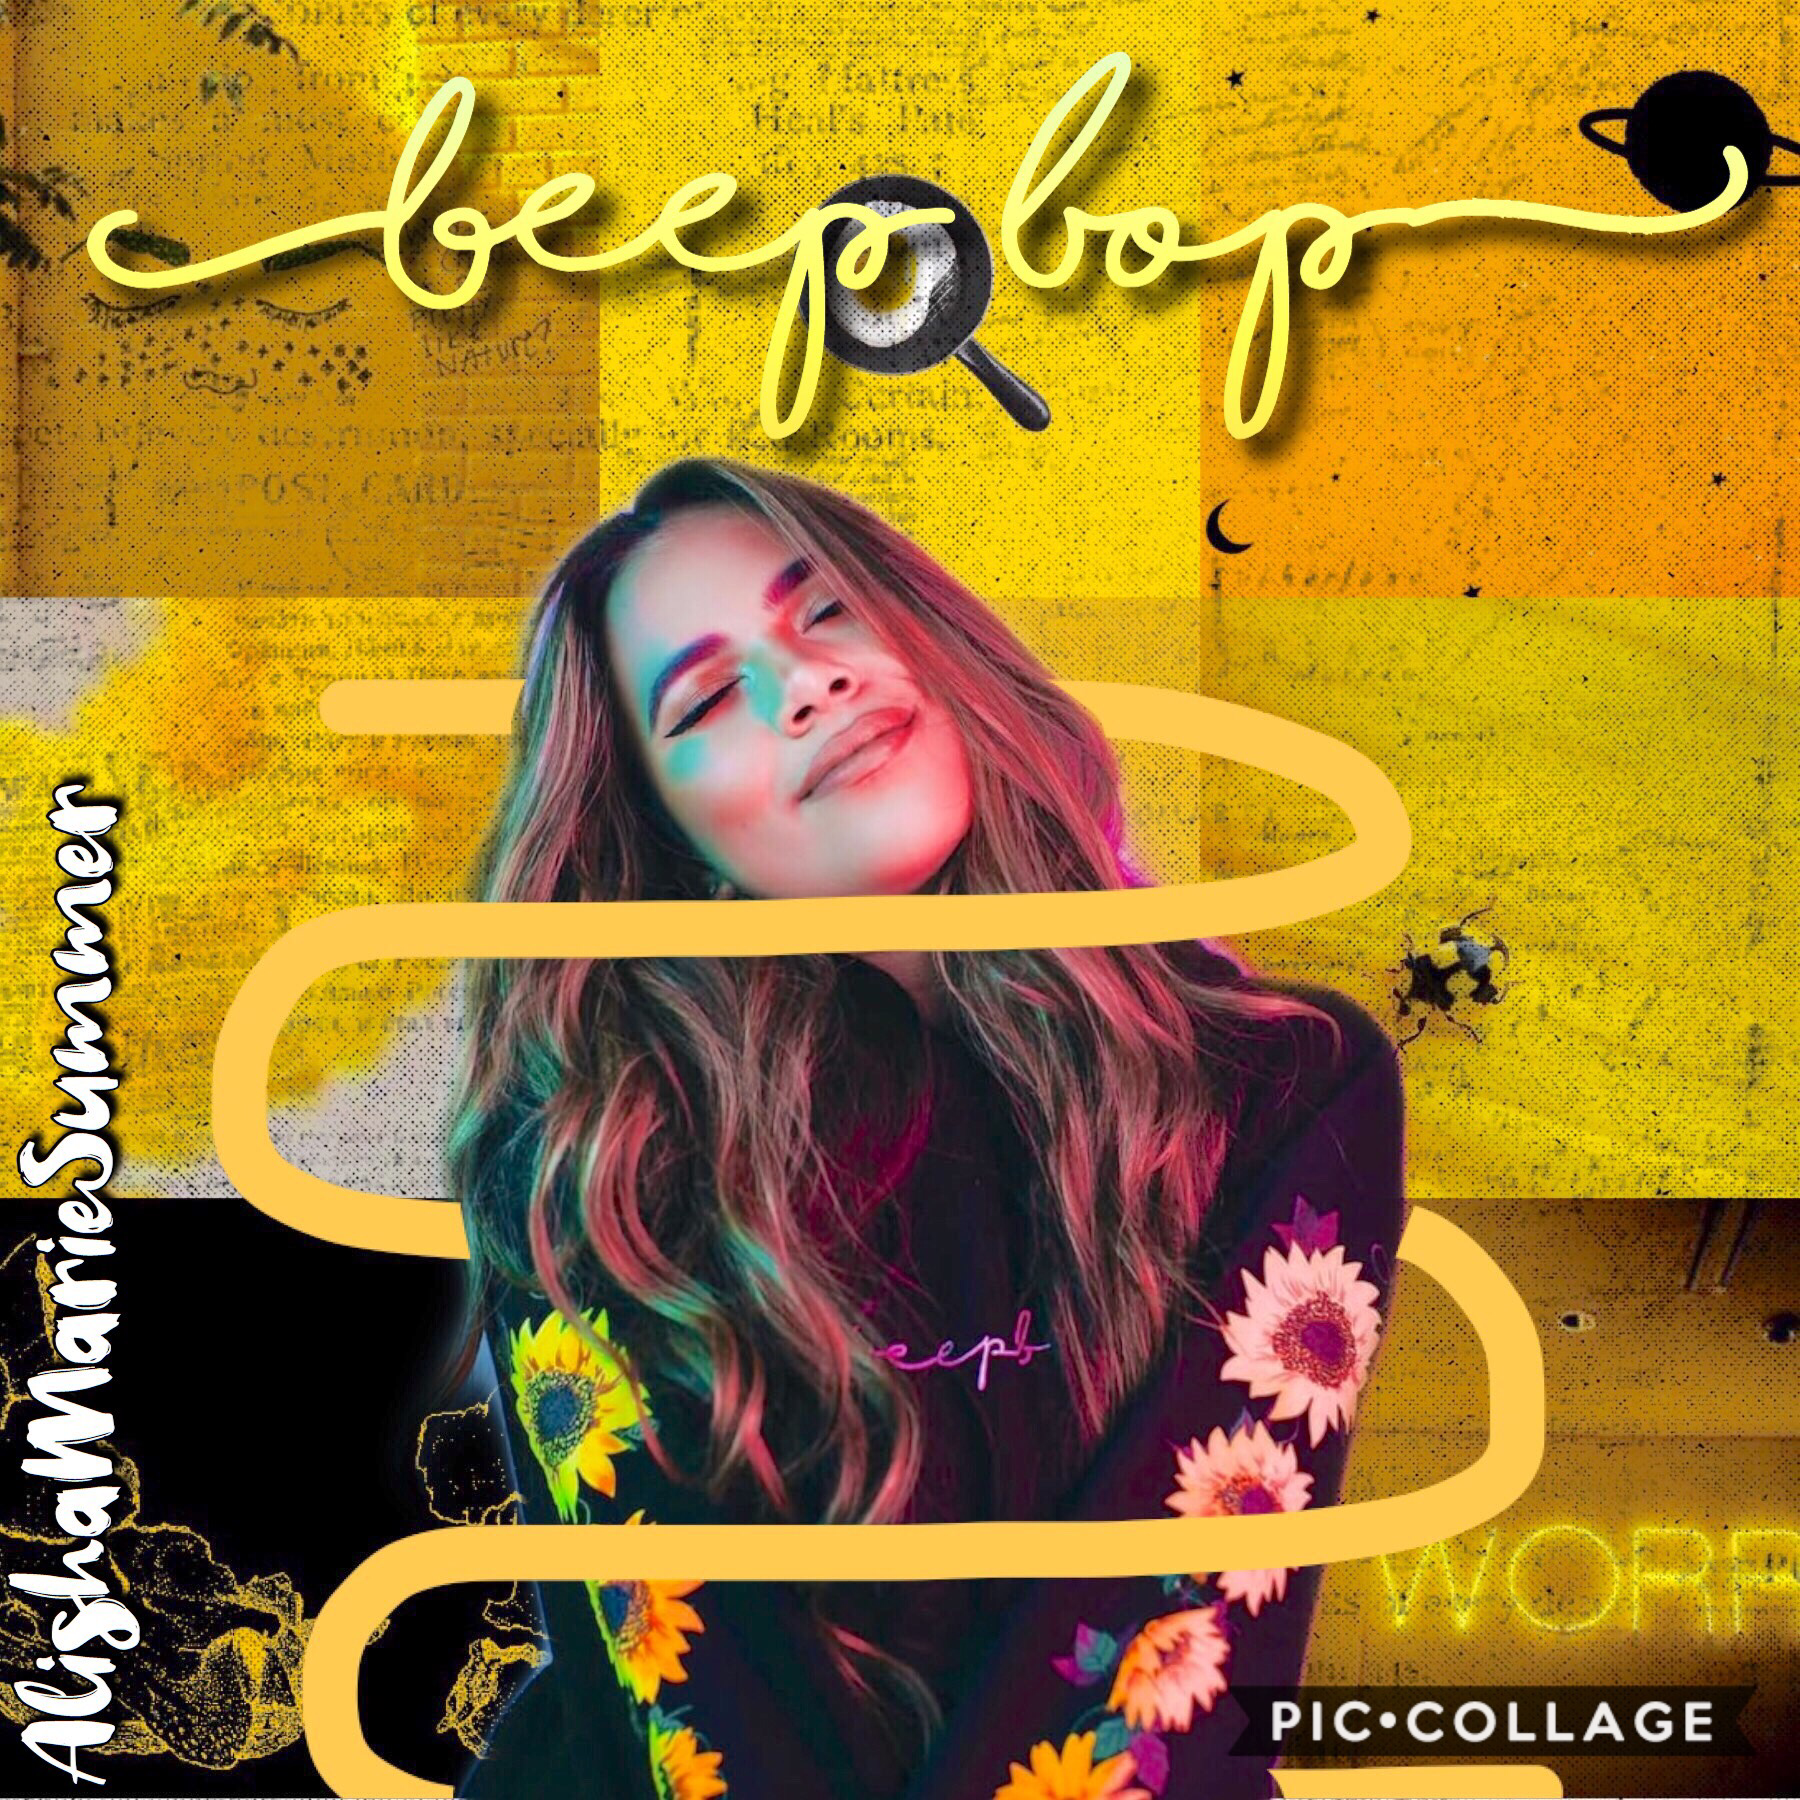 💛TaP💛
this is my final Adelaine Morin edit😭i enjoyed doing this theme so much and i hope you guys liked it. QOTD: who is your favorite dude Youtuber(s)?
AOTD: The Dolan Twins 😘😍💖❤️